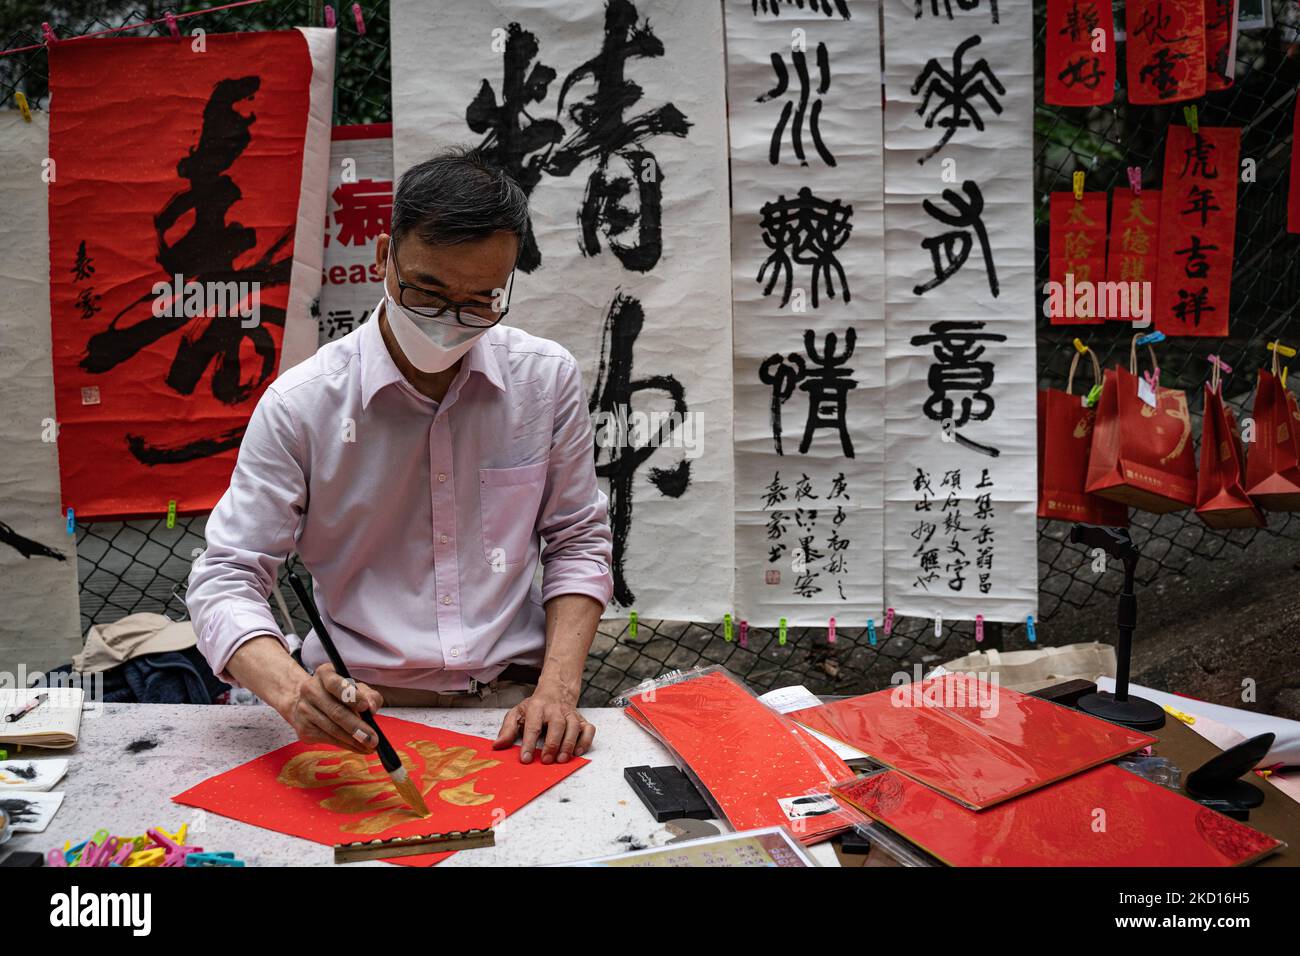 On January 24, 2022, Hong Kong, on the eve of Chinese New Year in Hong Kong, some calligraphers write lucky messages on the street. (Photo by Leung Man Hei/NurPhoto) Stock Photo